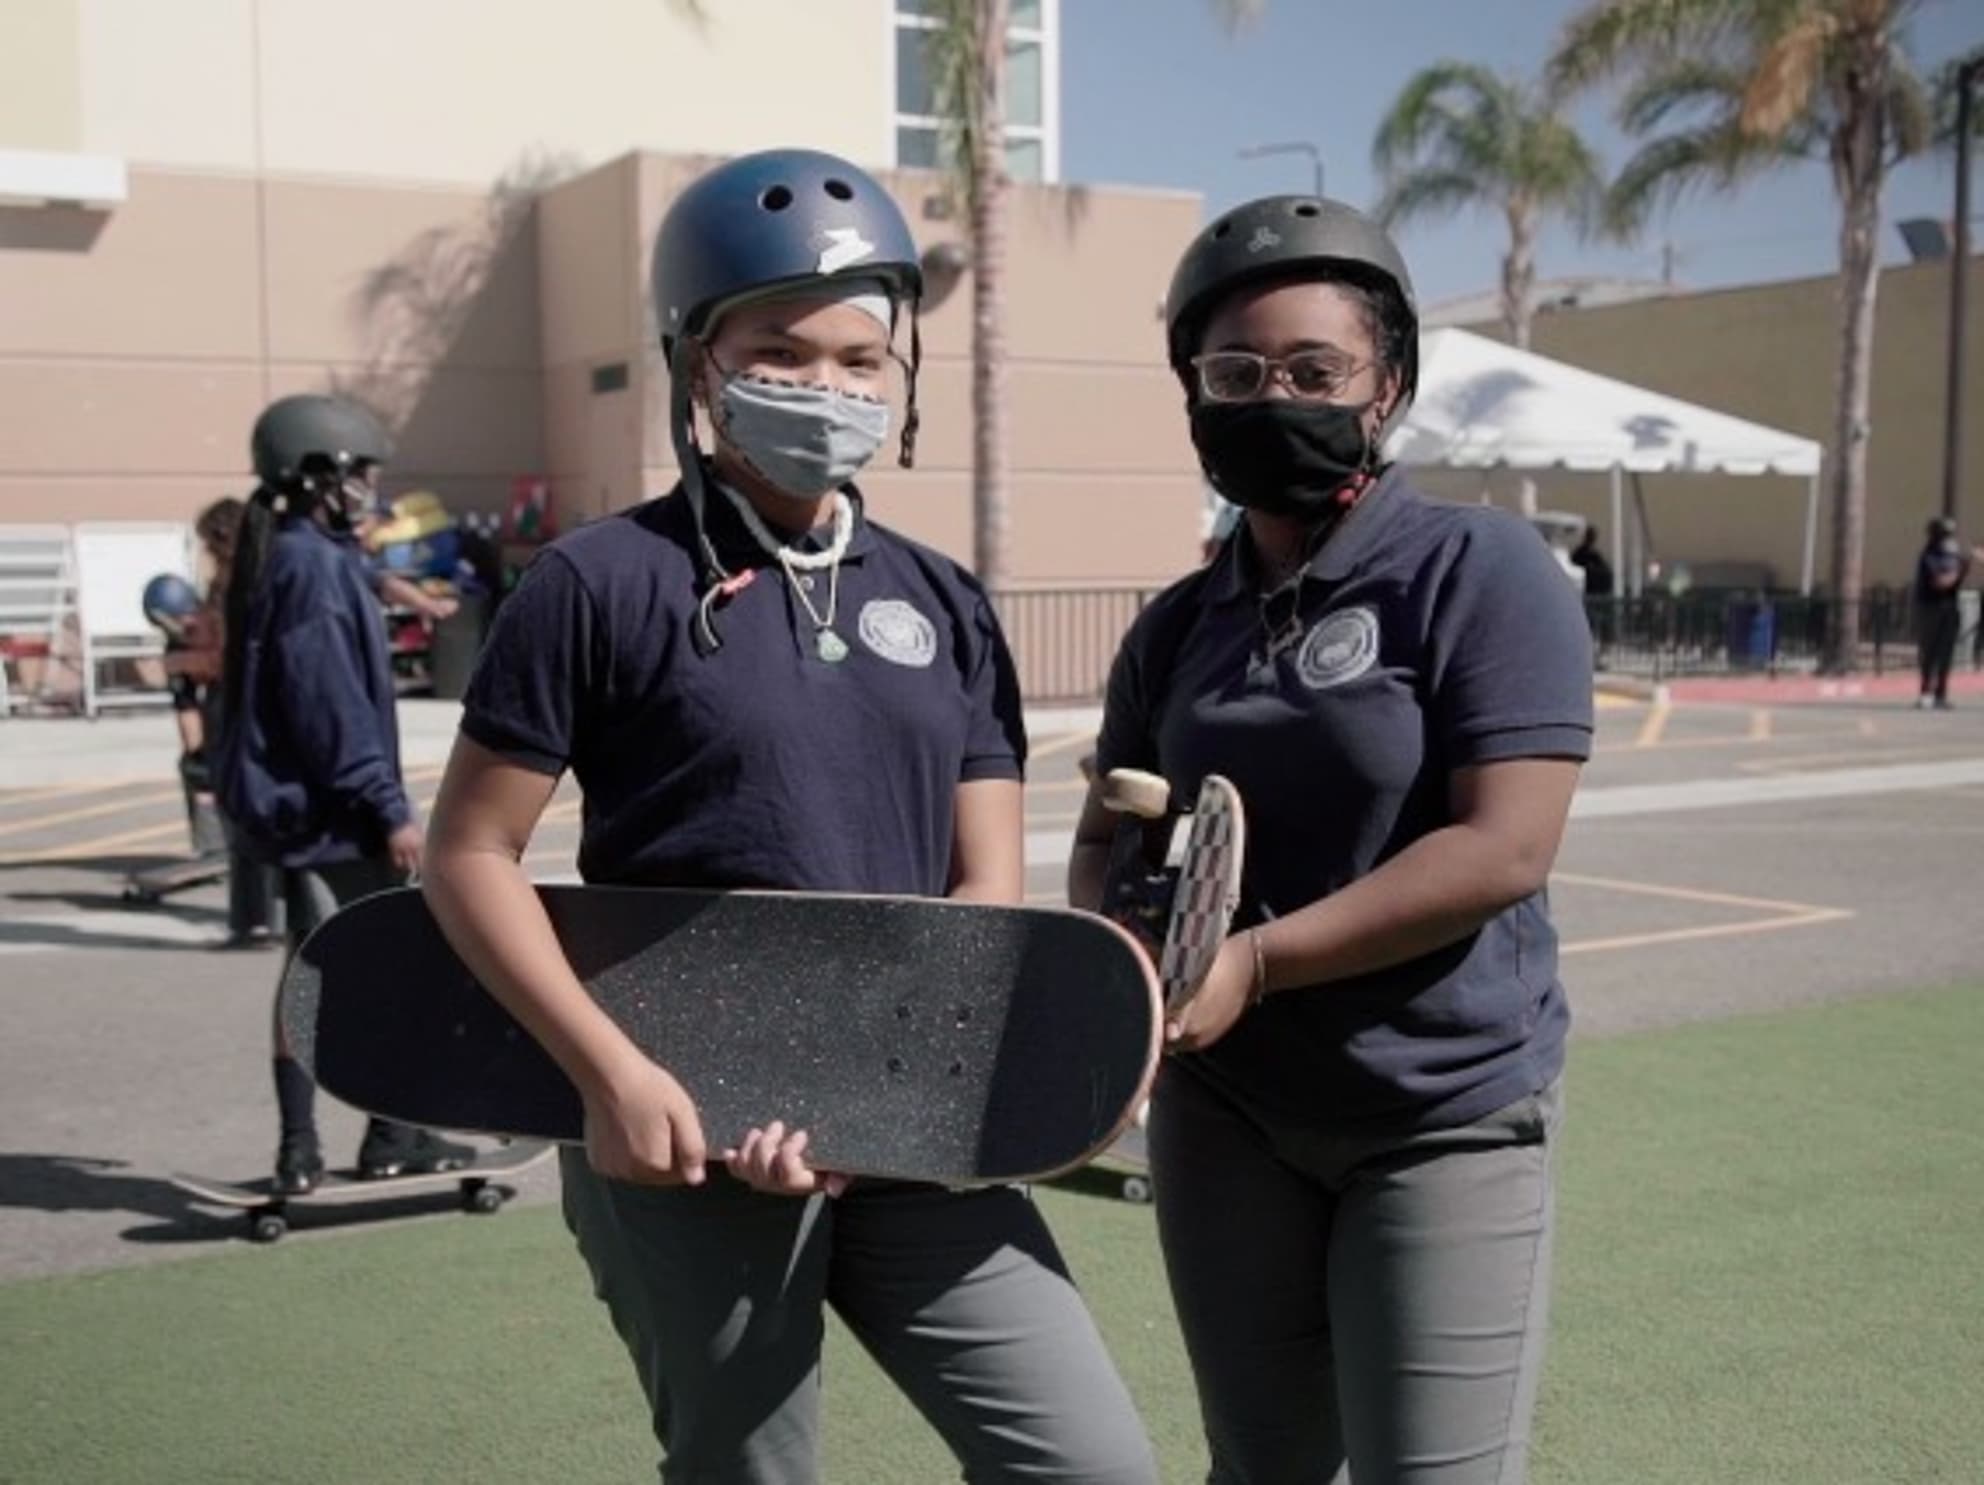 Two ICEF students holding skateboards